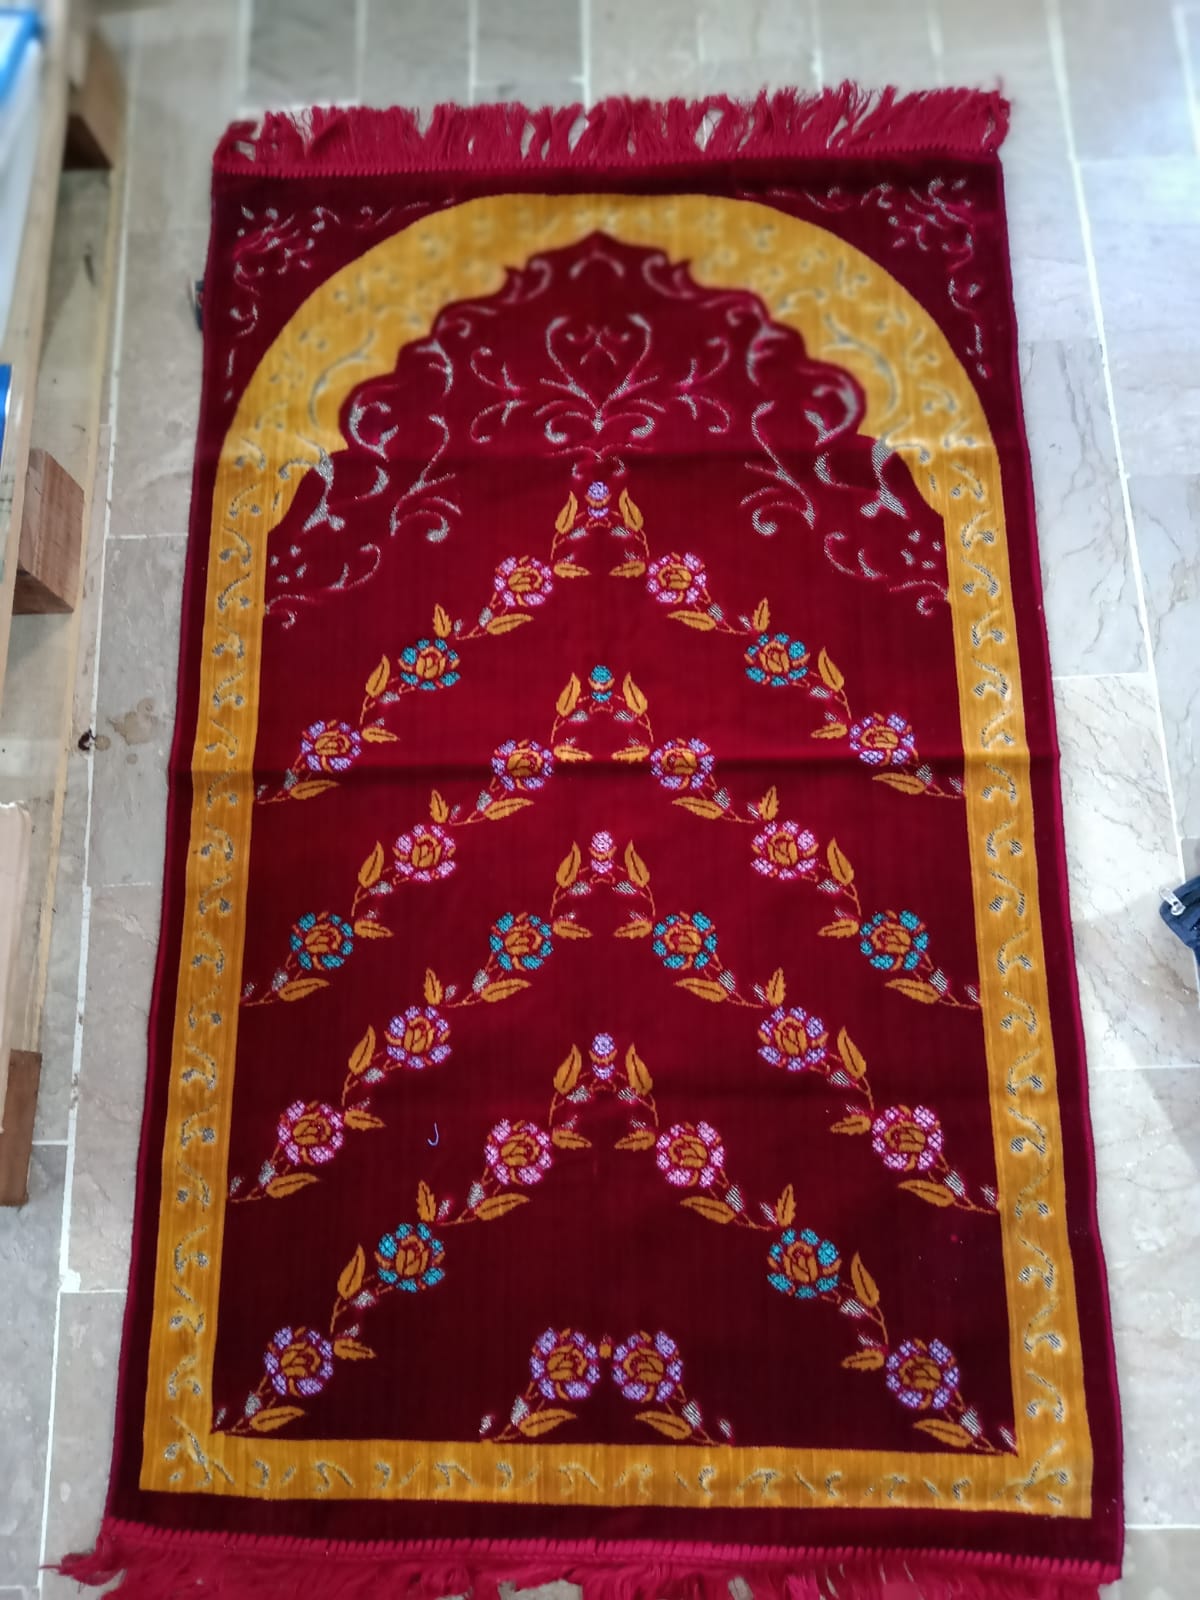 Luxury Butt Prayer Mats , Comfortable and High Quality Prayer mats. Available in different colors and designs. Order yours now from our website.